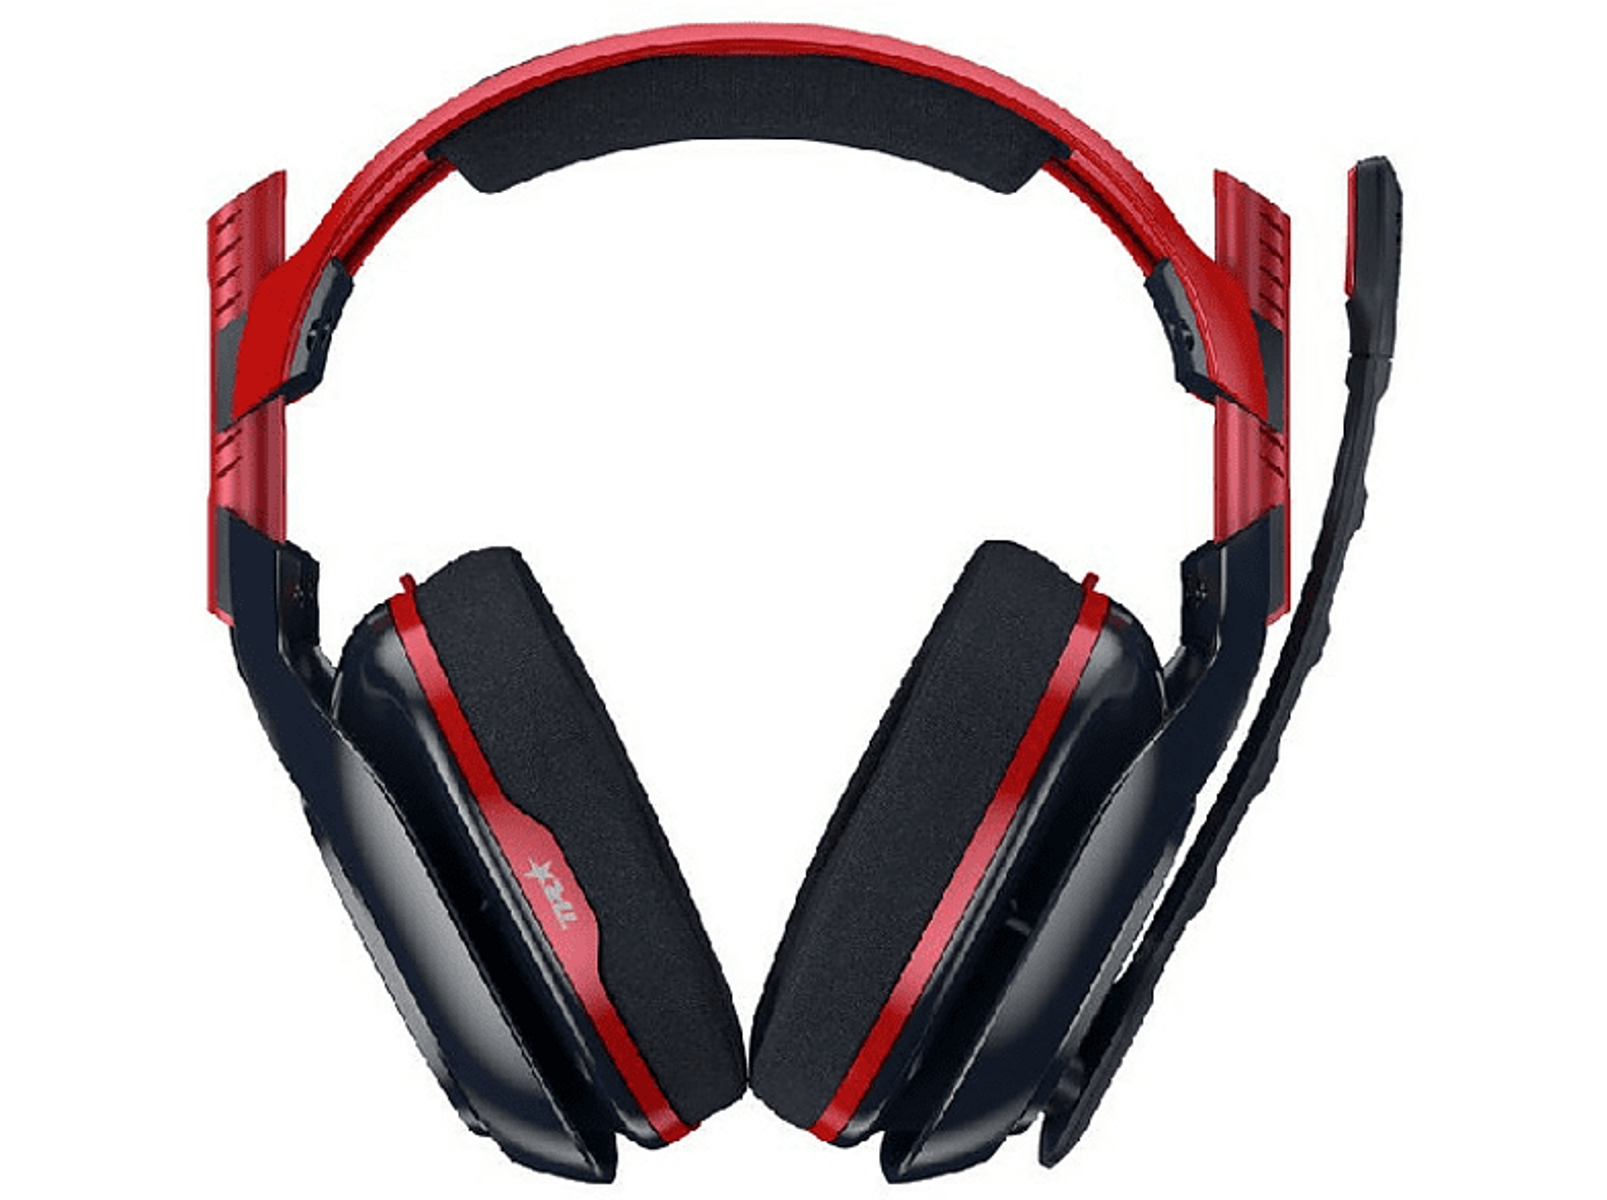 ASTRO 939-001668 A40 ANNIVERSARY RED/BLUE, Headset Over-ear EDS Gaming TR Rot/Blau 10TH